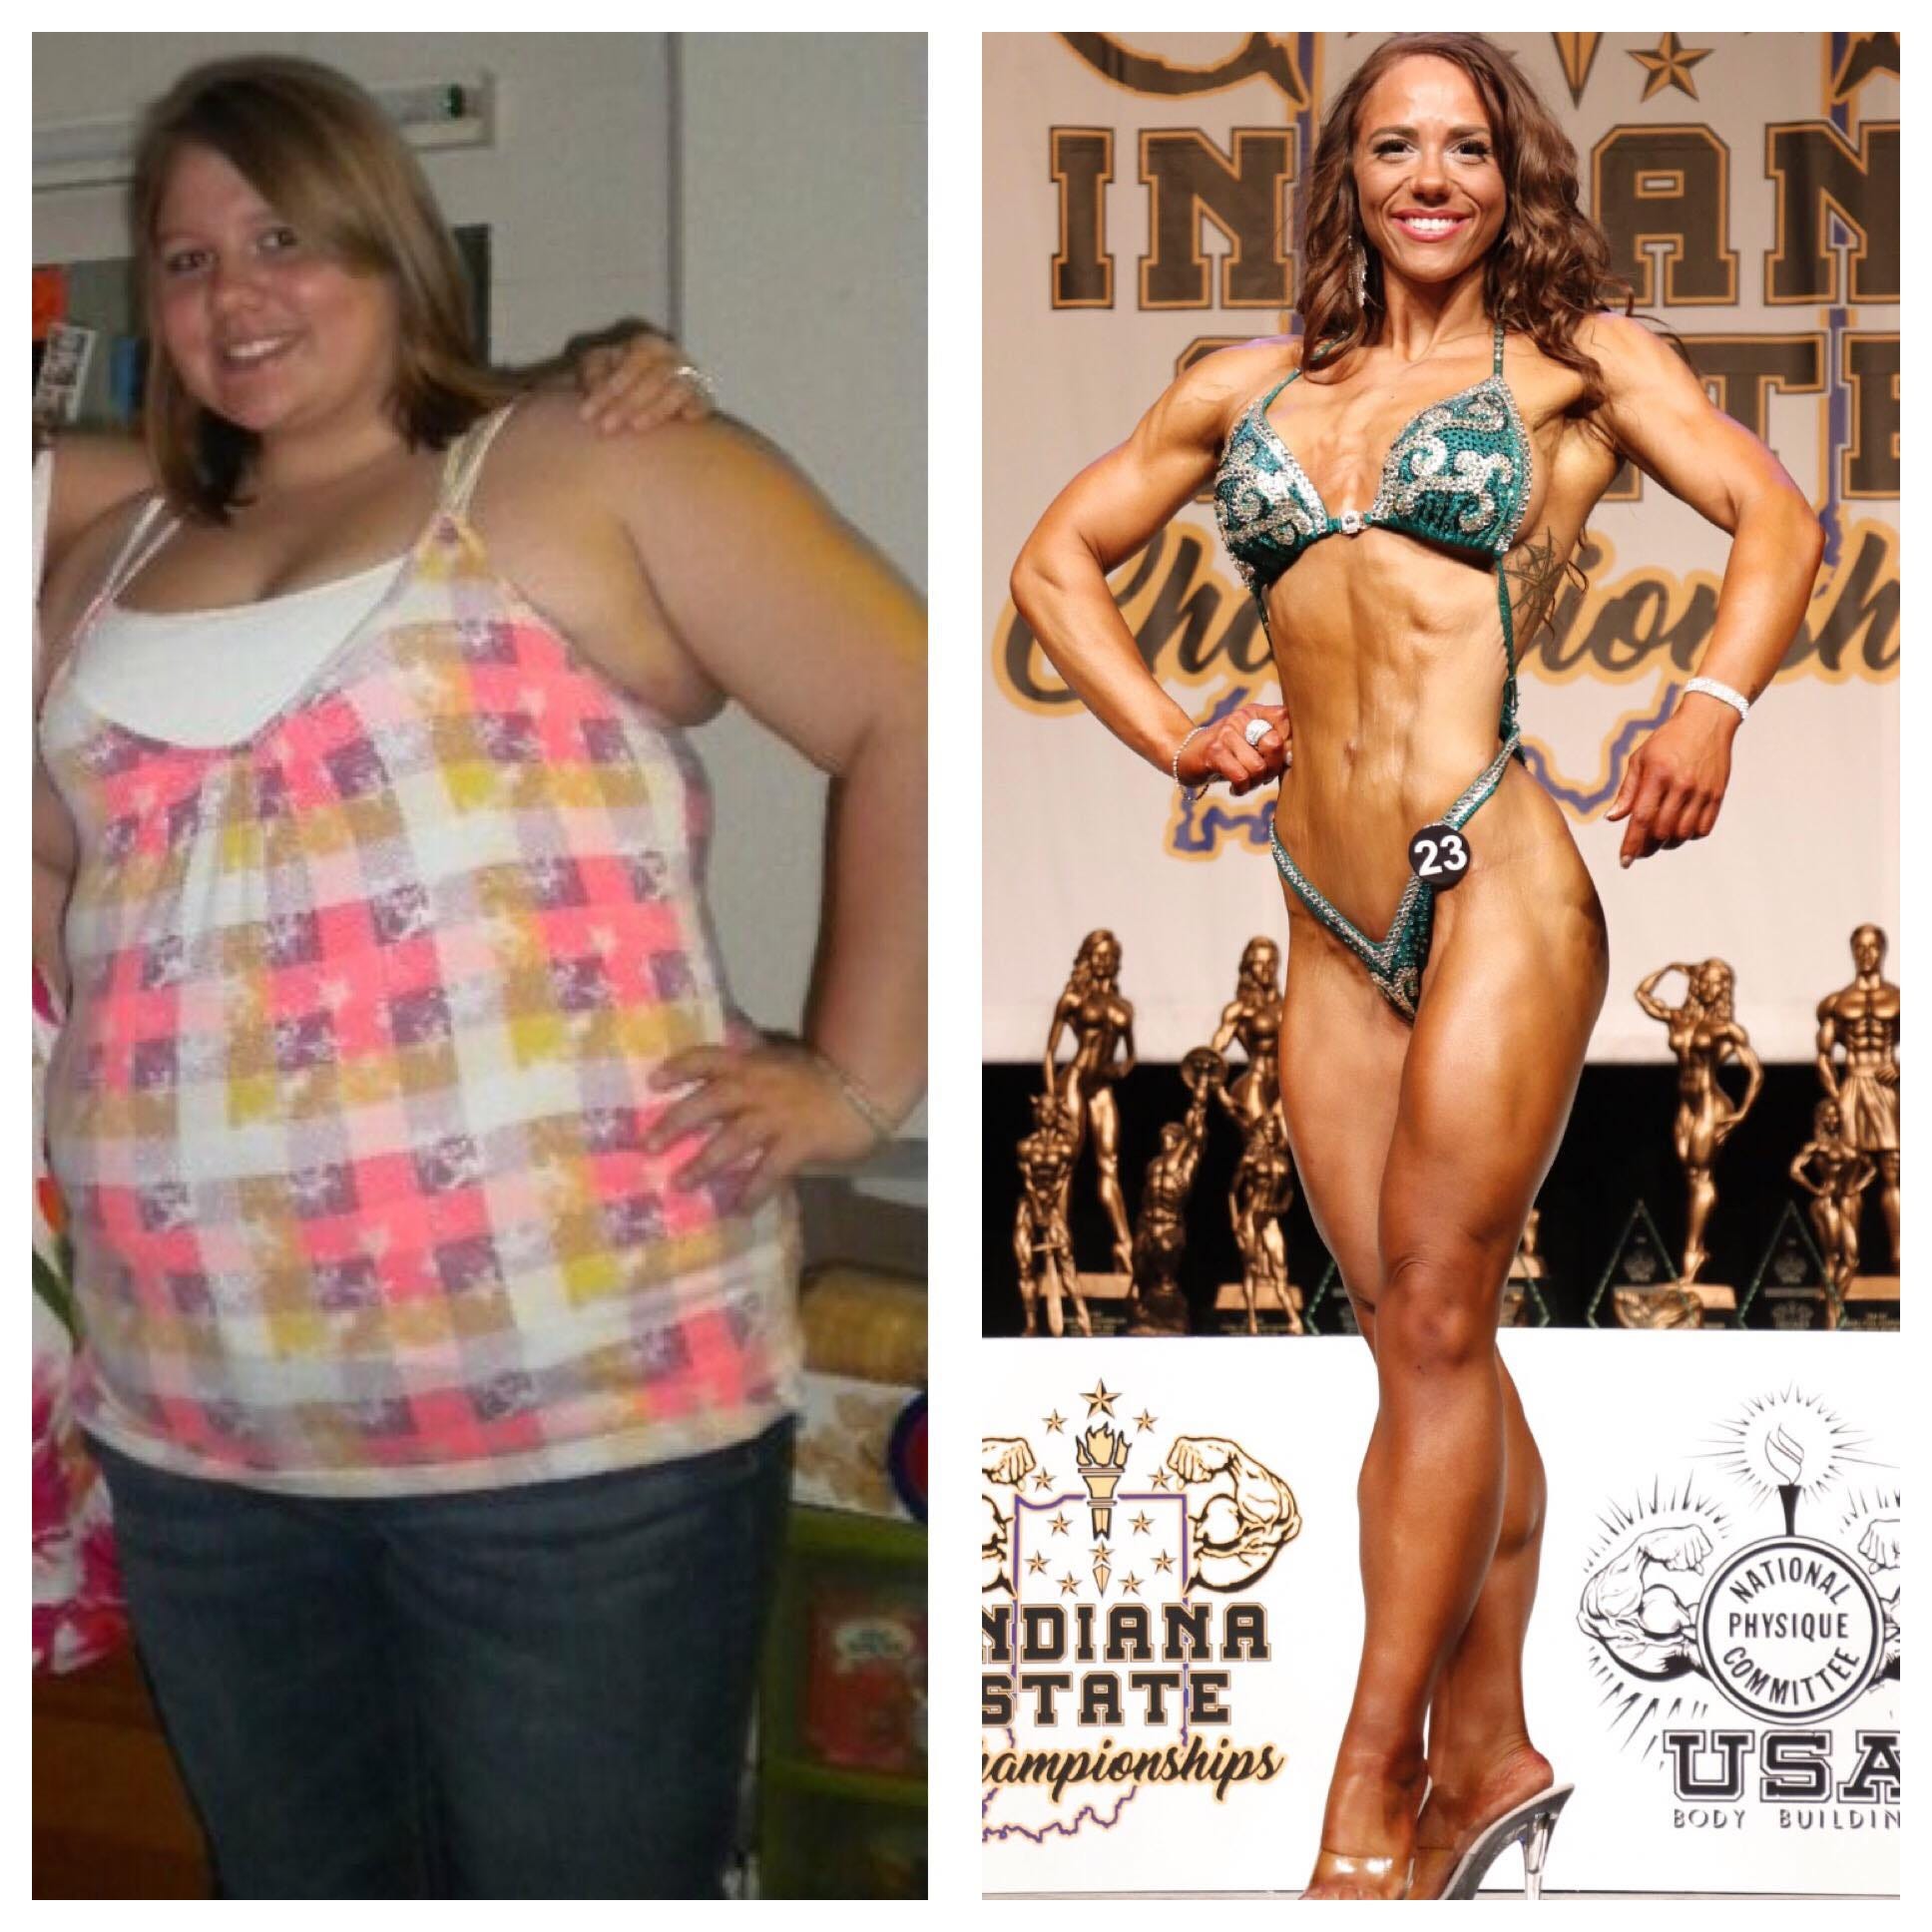 Indianapolis Woman Went From Weighing 300 Pounds To Bodybuilding Images, Photos, Reviews